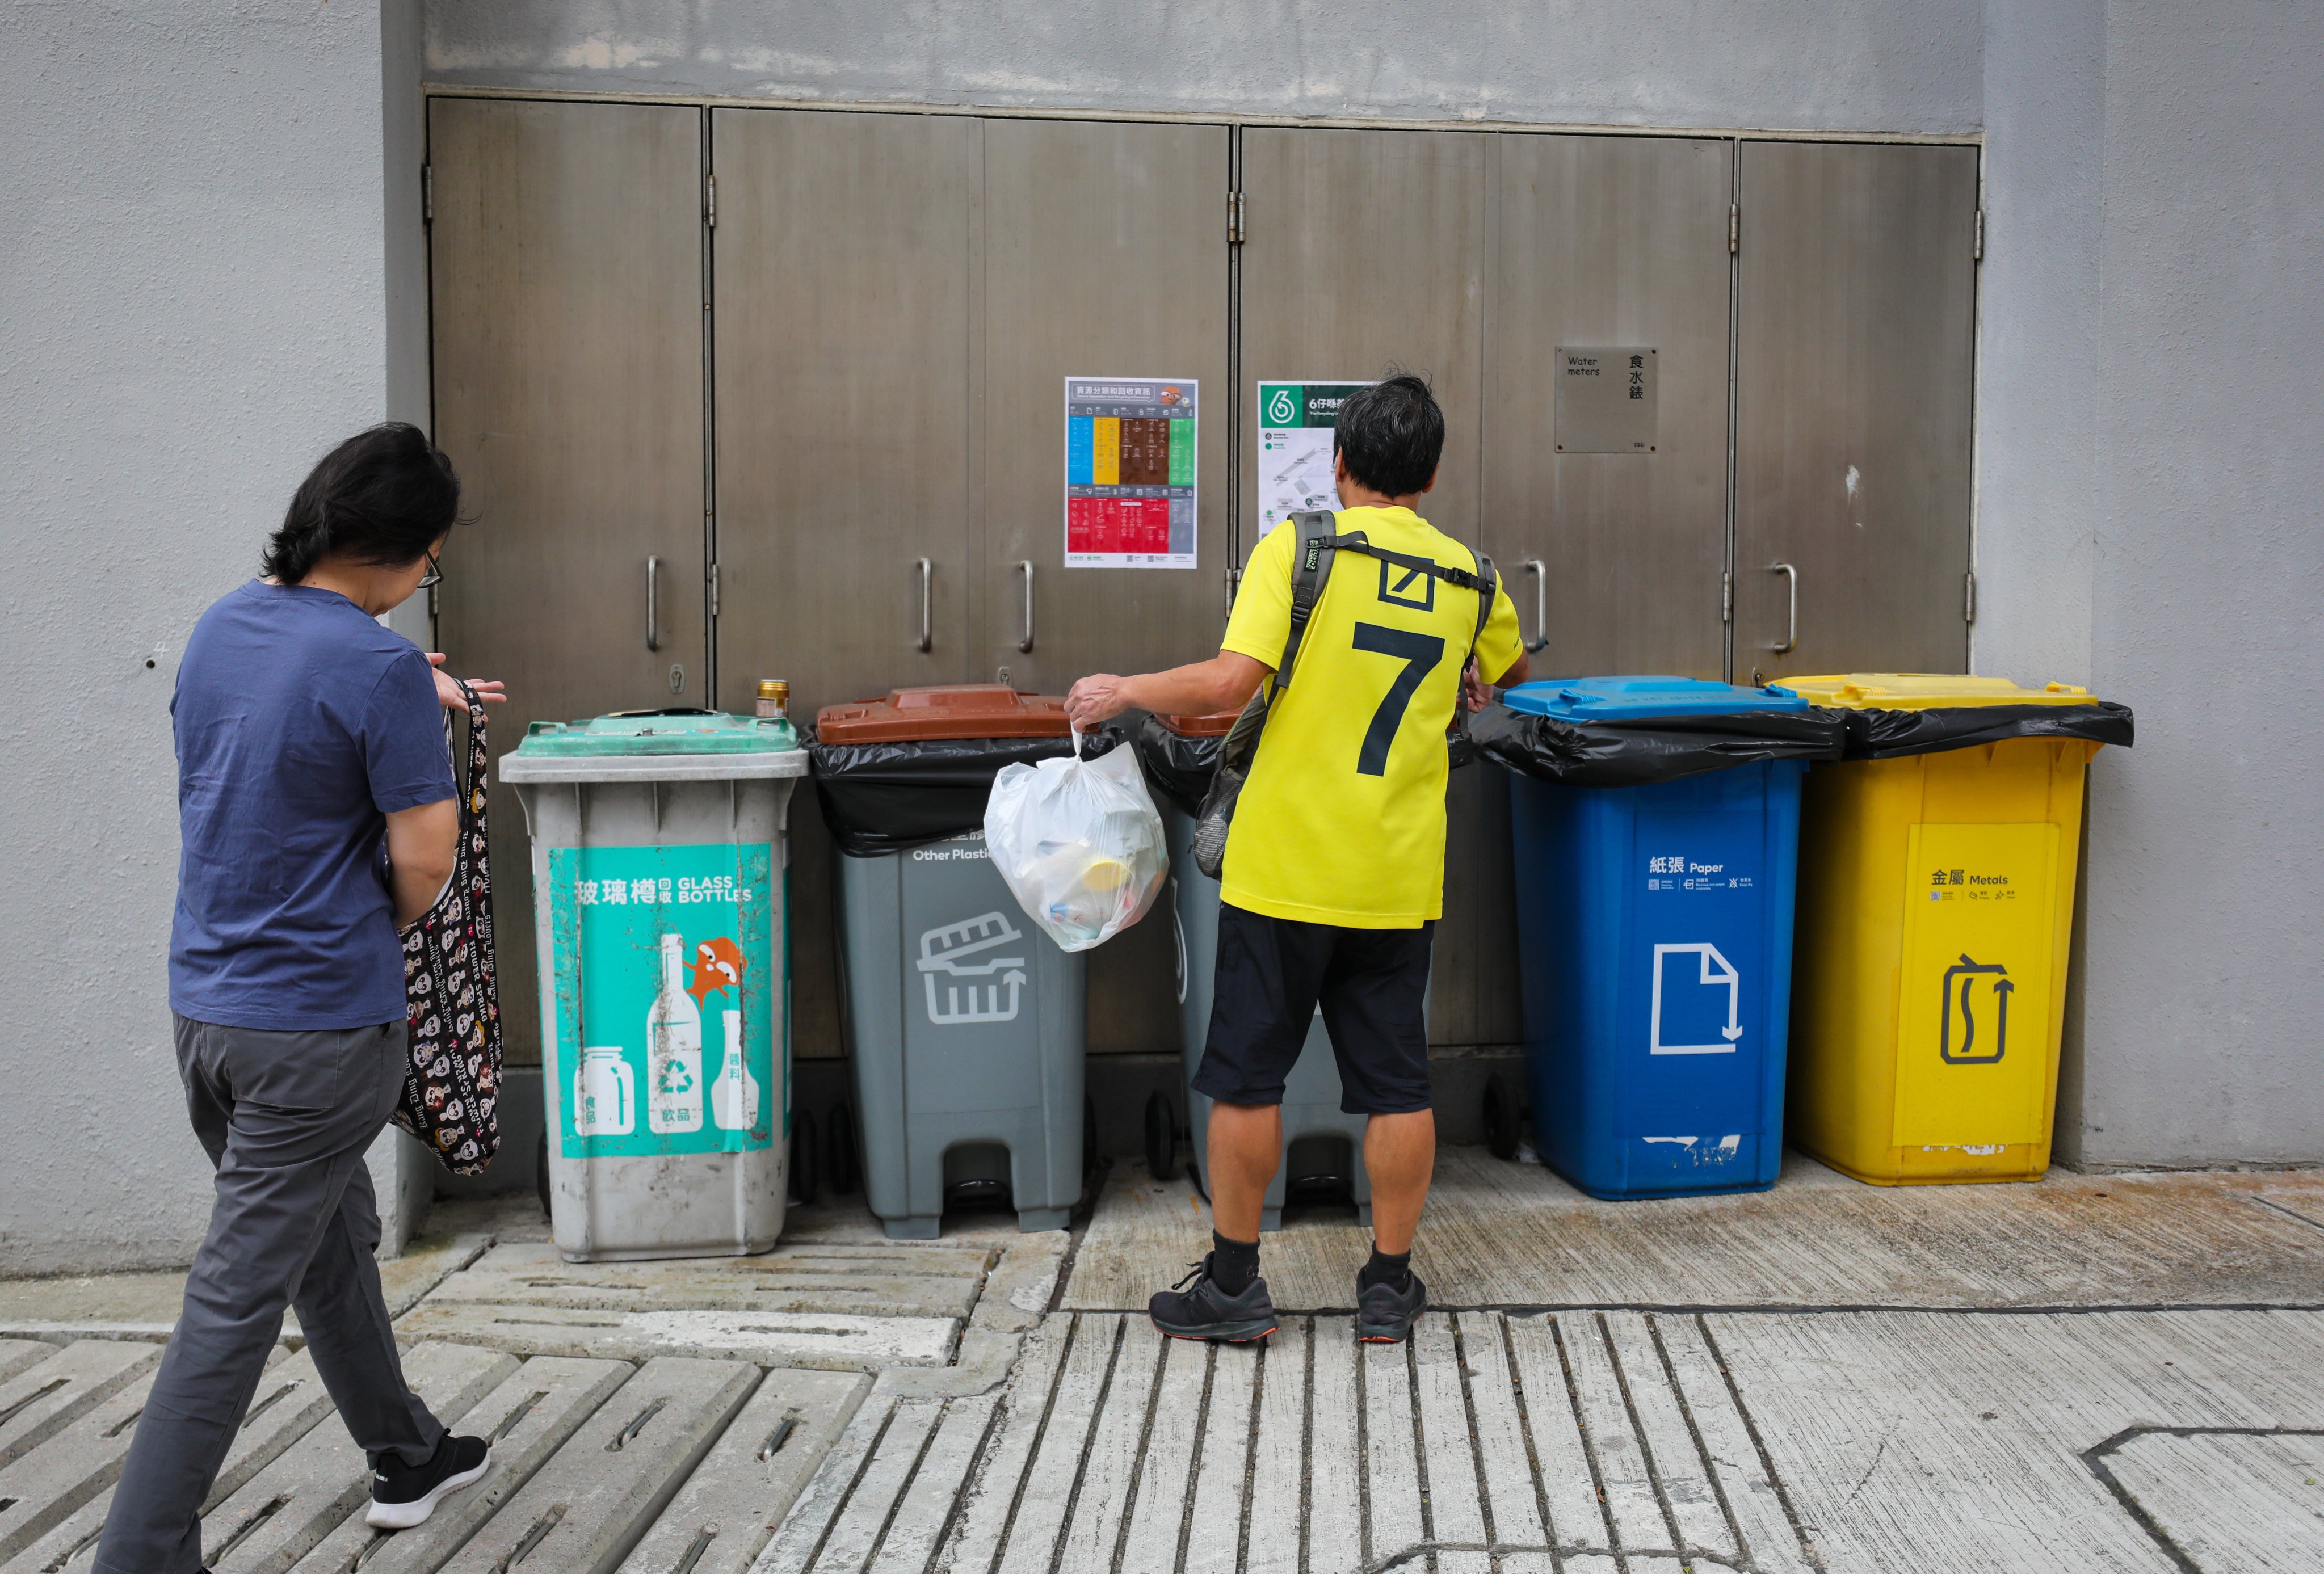 Residents bring their recycling at Lin Tsui Estate in Chai Wan, one of the 14 locations under the waste charging scheme trial. Photo: Xiaomei Chen